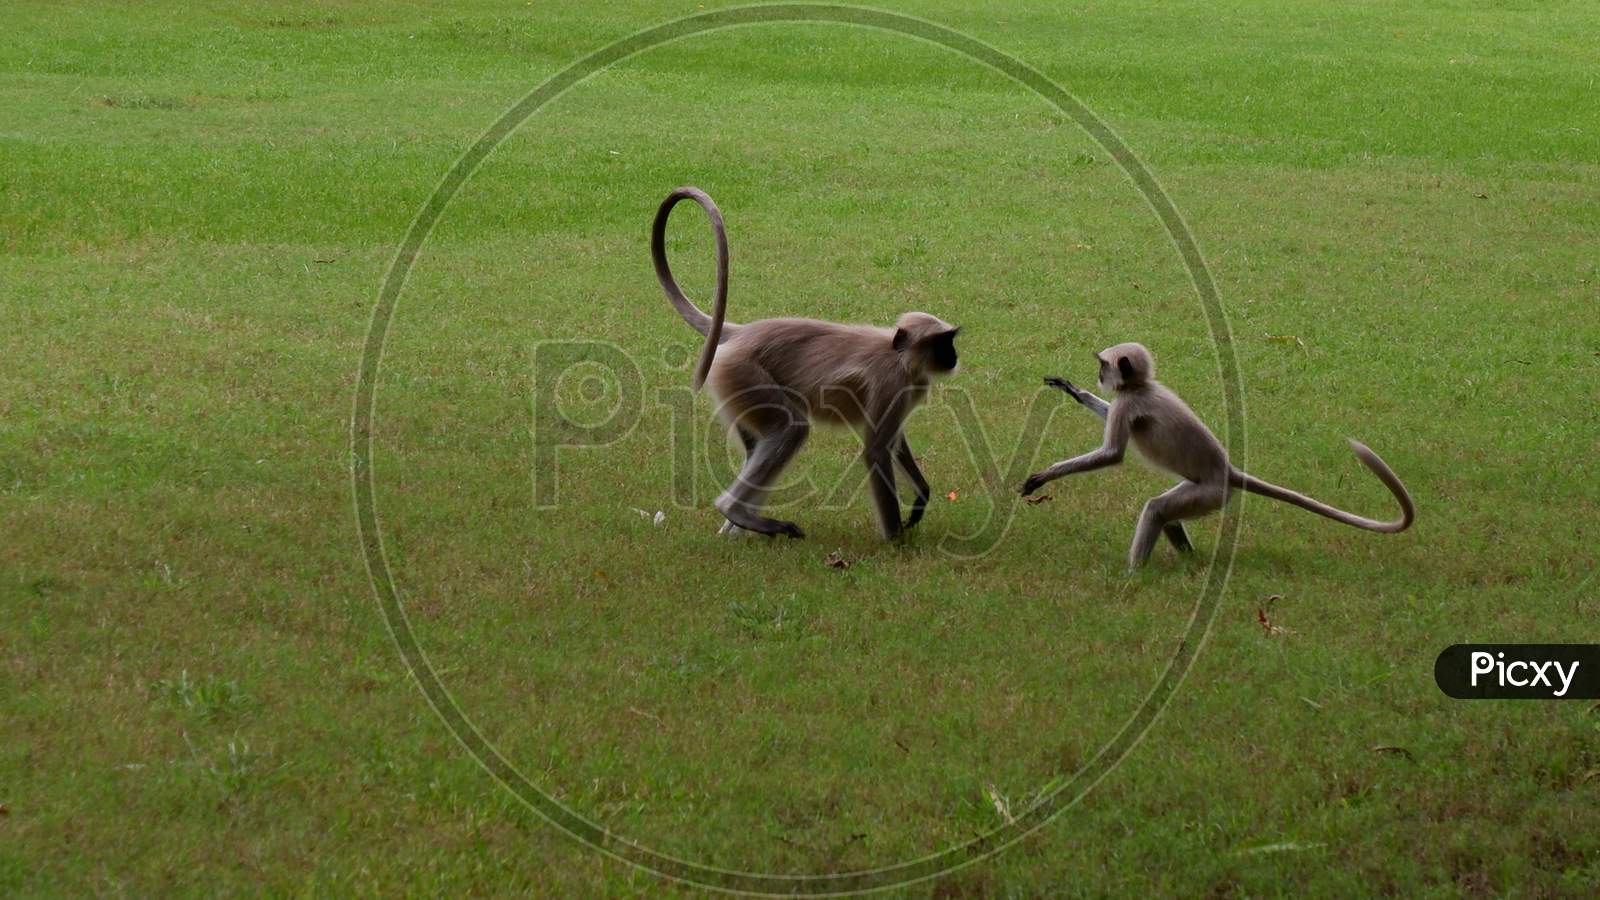 Baby Monkey playing with mother monkey in the garden